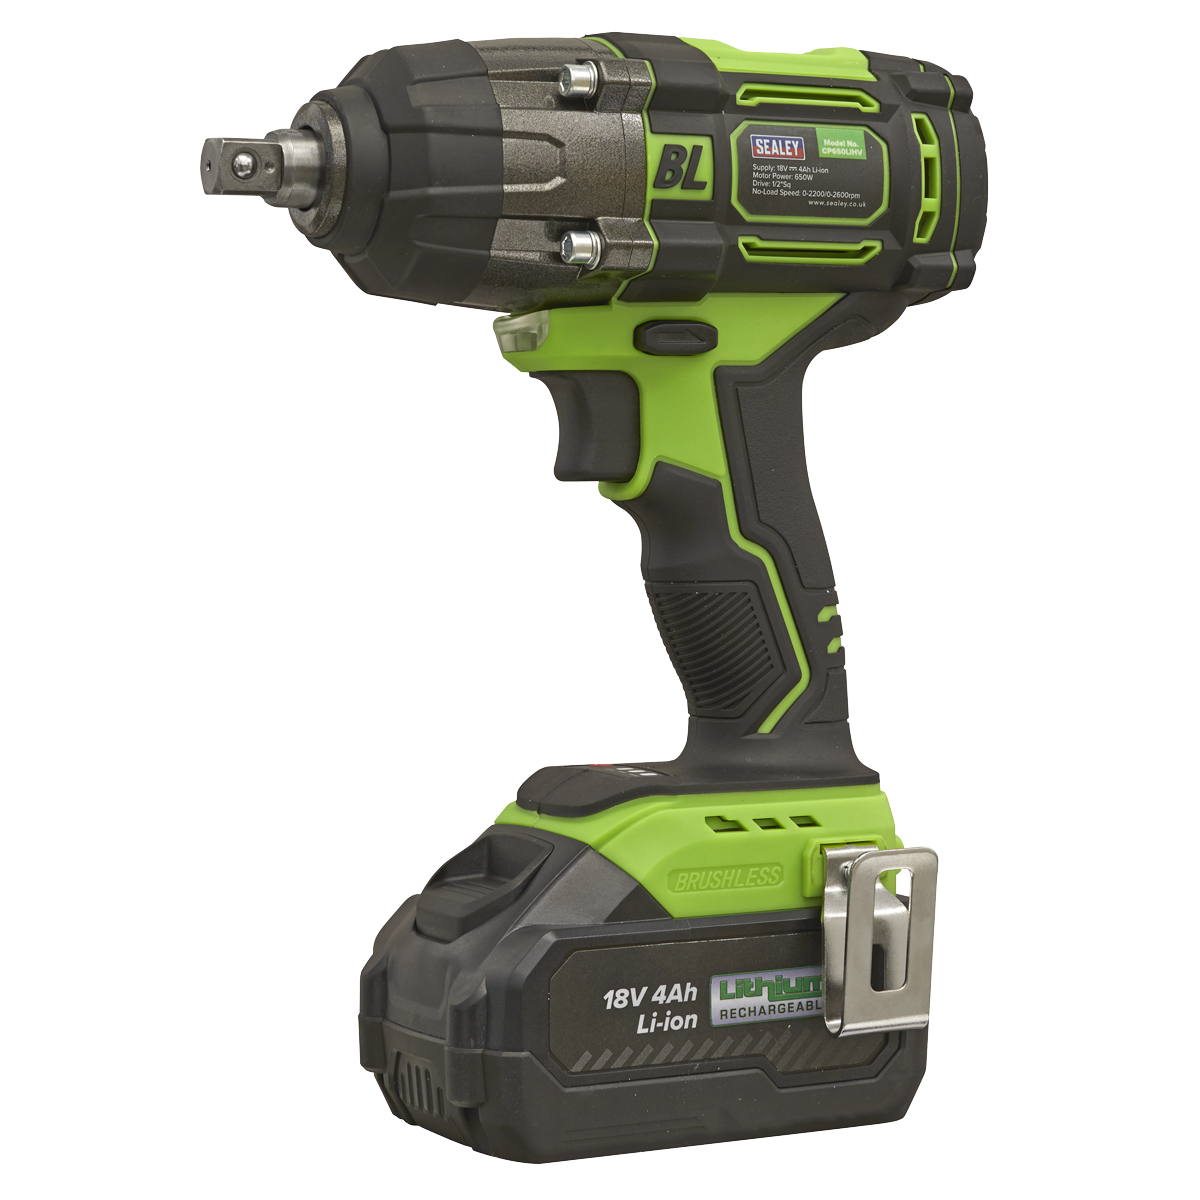 Sealey CP650LIHV Cordless Impact Wrench 18V 4Ah Lithium-ion 1/2"Sq Drive